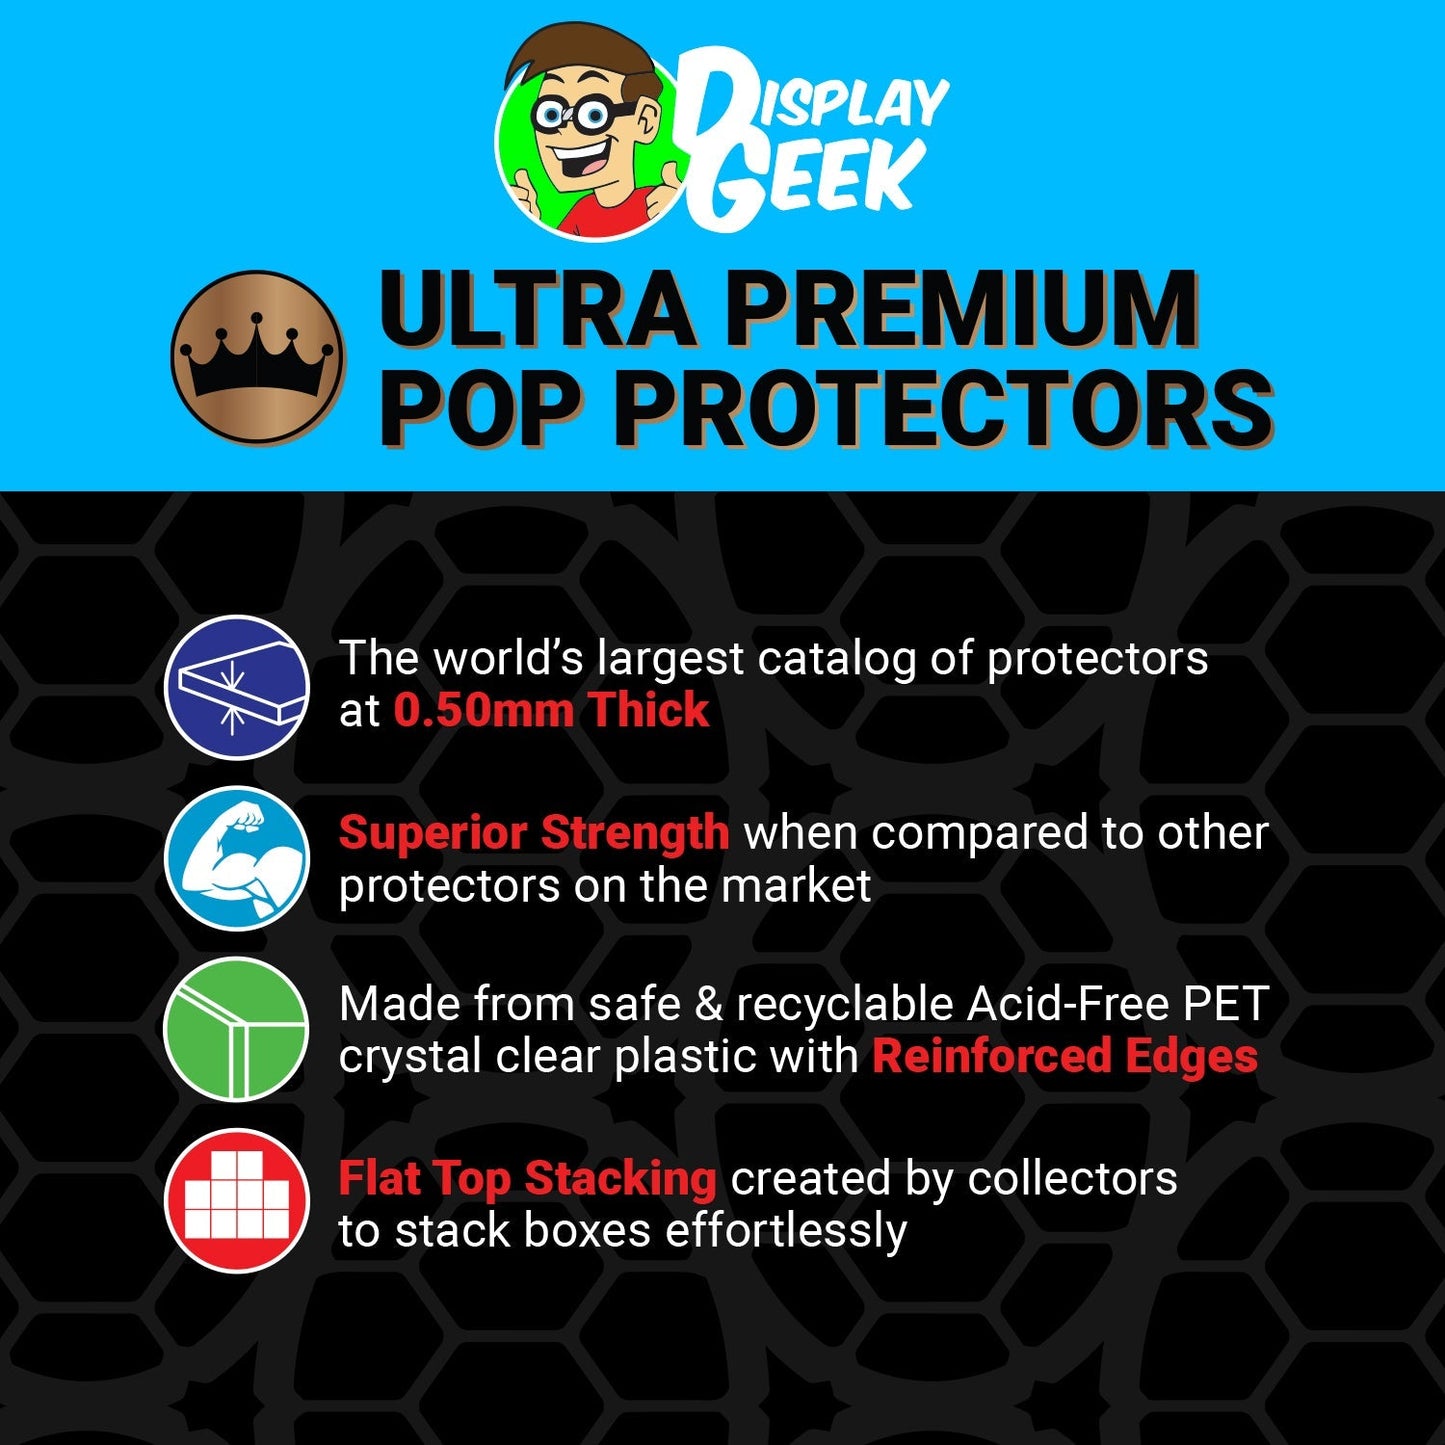 Pop Protector for 10 inch Arishem #739 Jumbo Funko Pop - PPG Pop Protector Guide Search Created by Display Geek